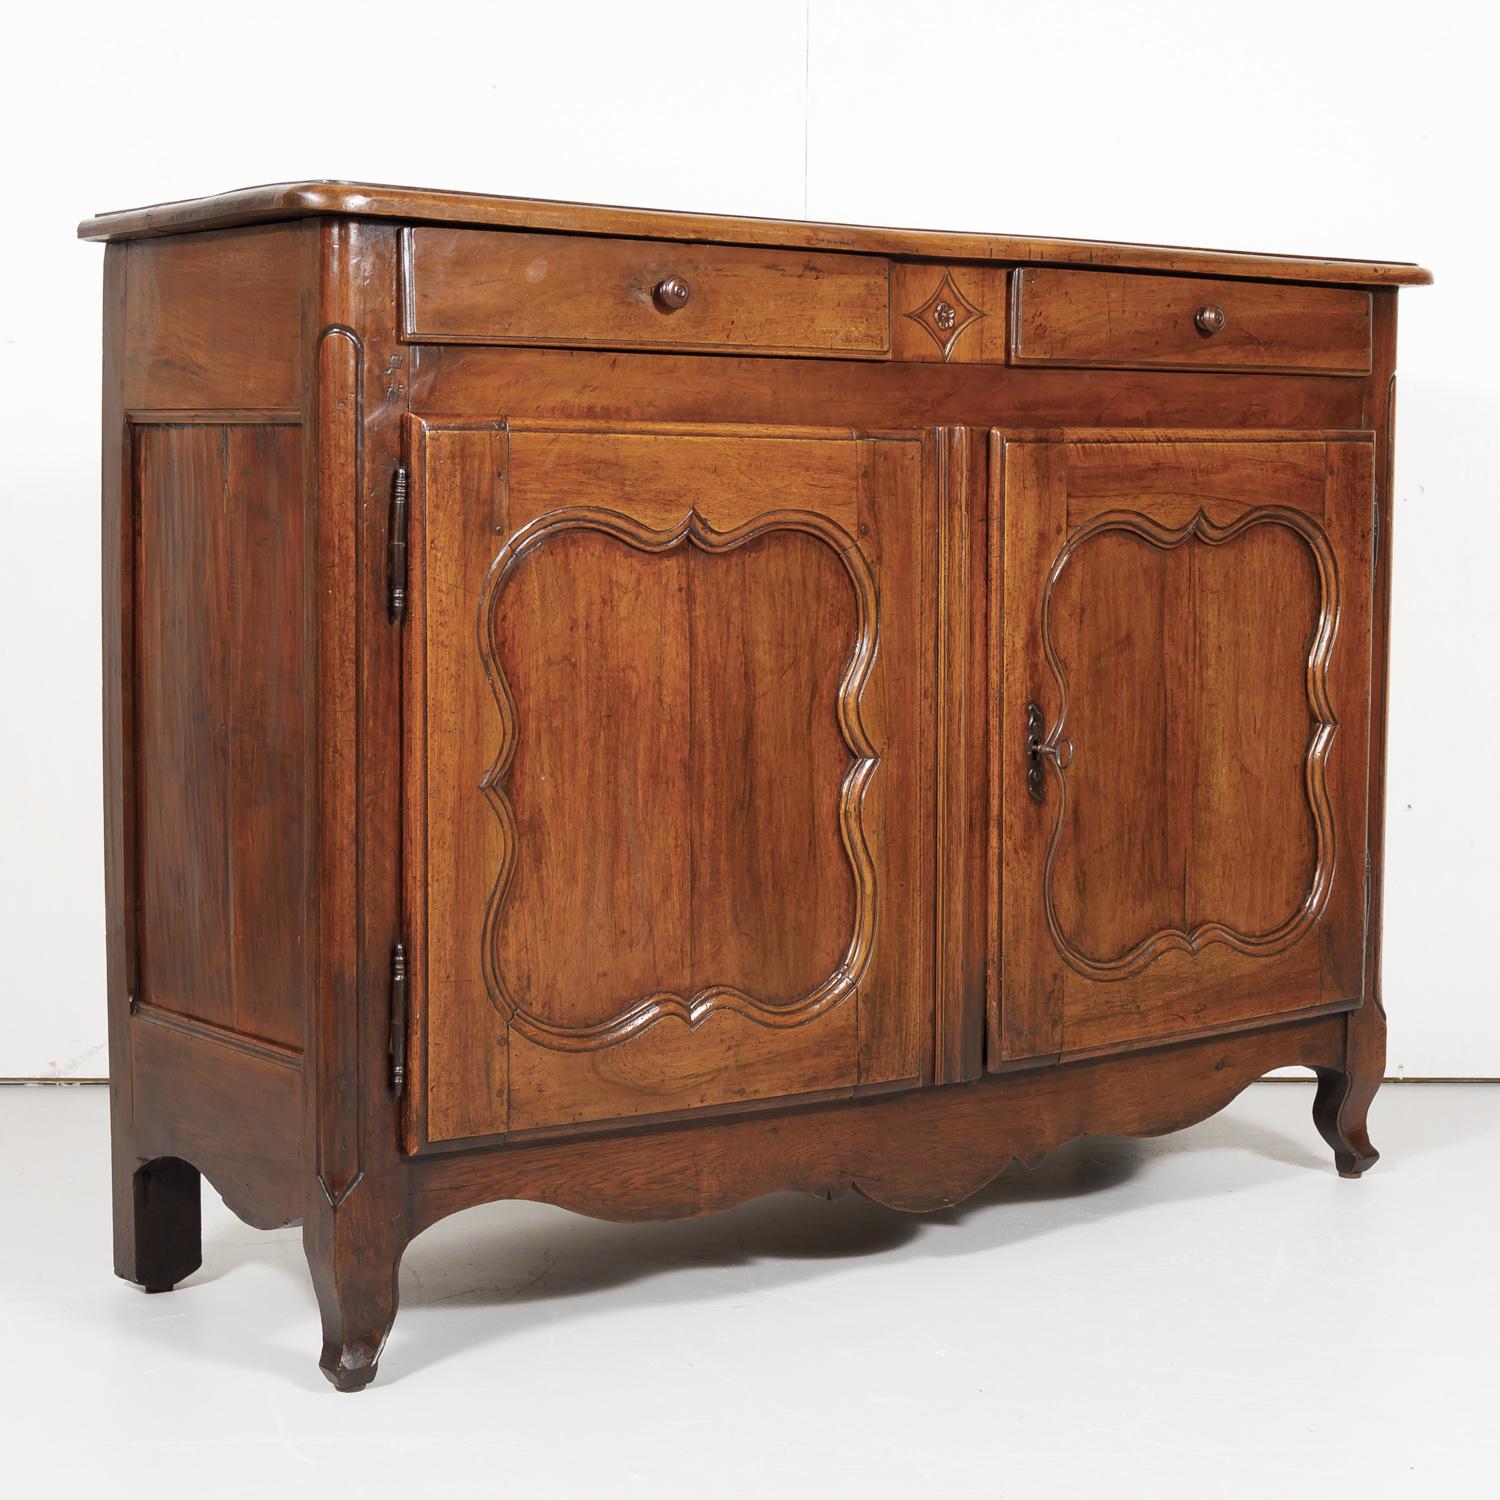 18th century Country French Louis XV period buffet handcrafted of solid walnut by craftsmen in Bordeaux having a beveled, two plank rectangular top above two frieze drawers and two lower doors that open to reveal ample storage, circa 1750s. Simple,